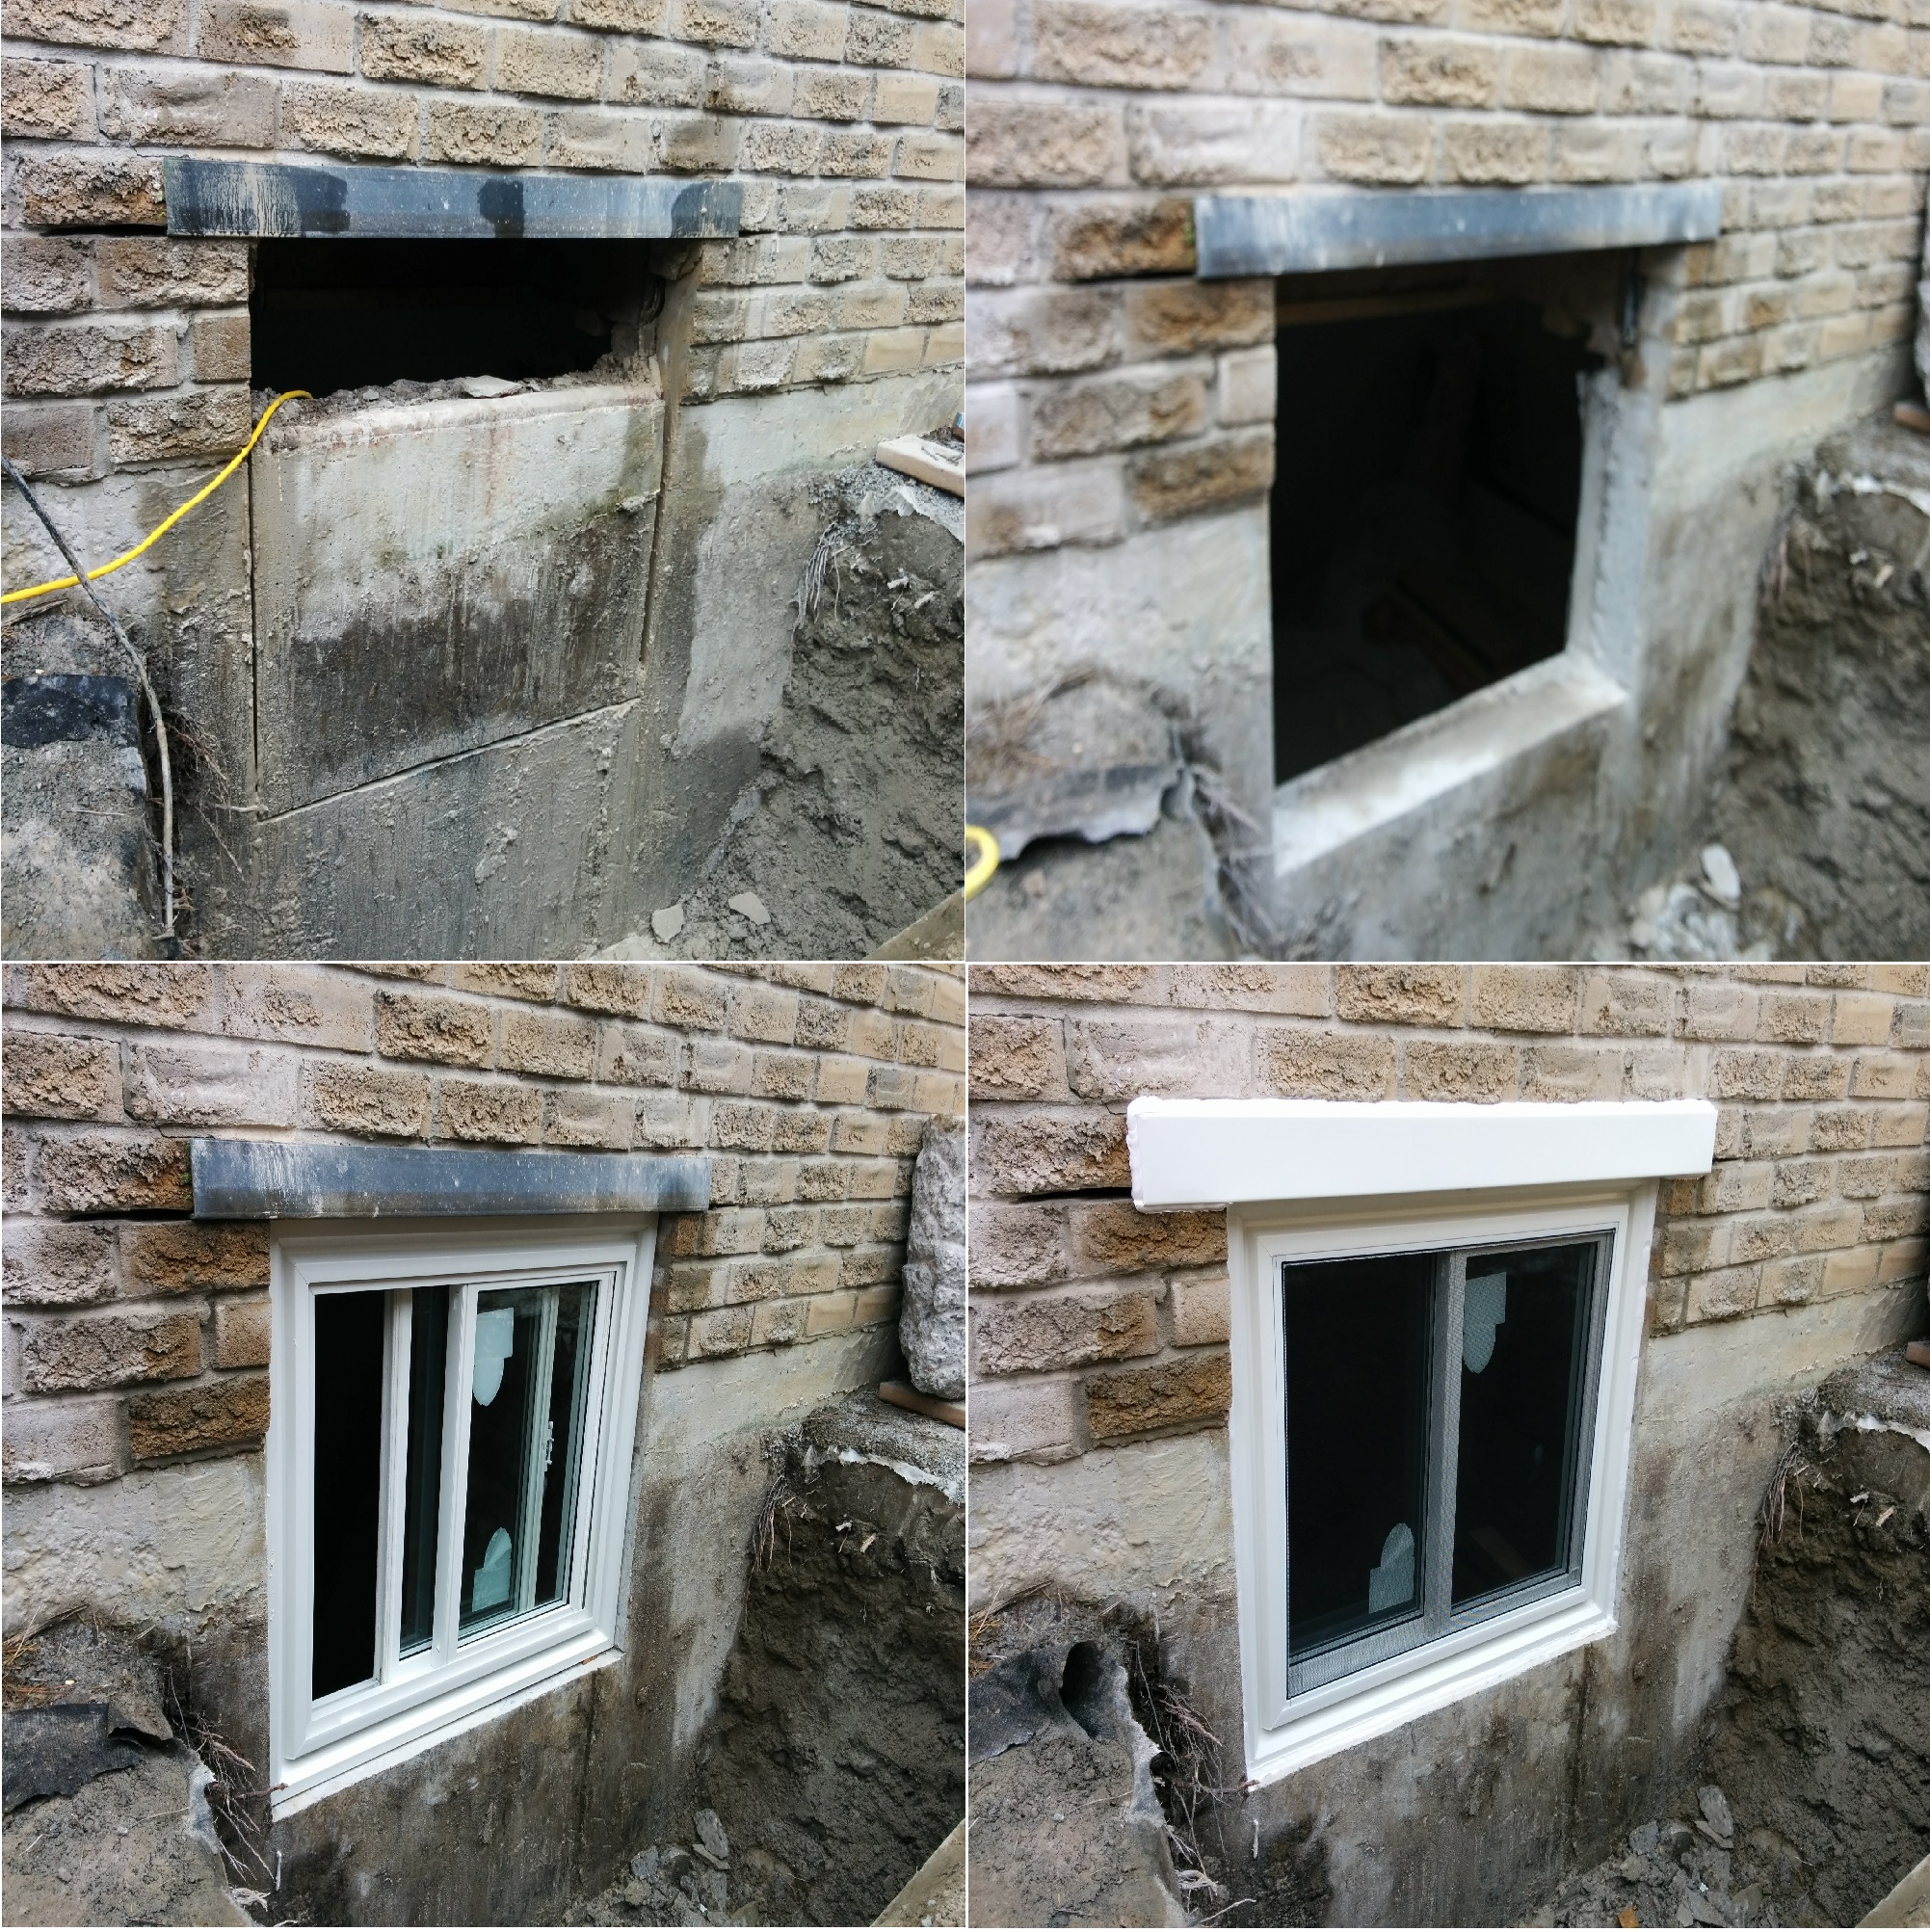 This job is egress basement window. Required to cut concrete foundation, cut brick, brick lintel installation, egress window installation, aluminum flashing capping.